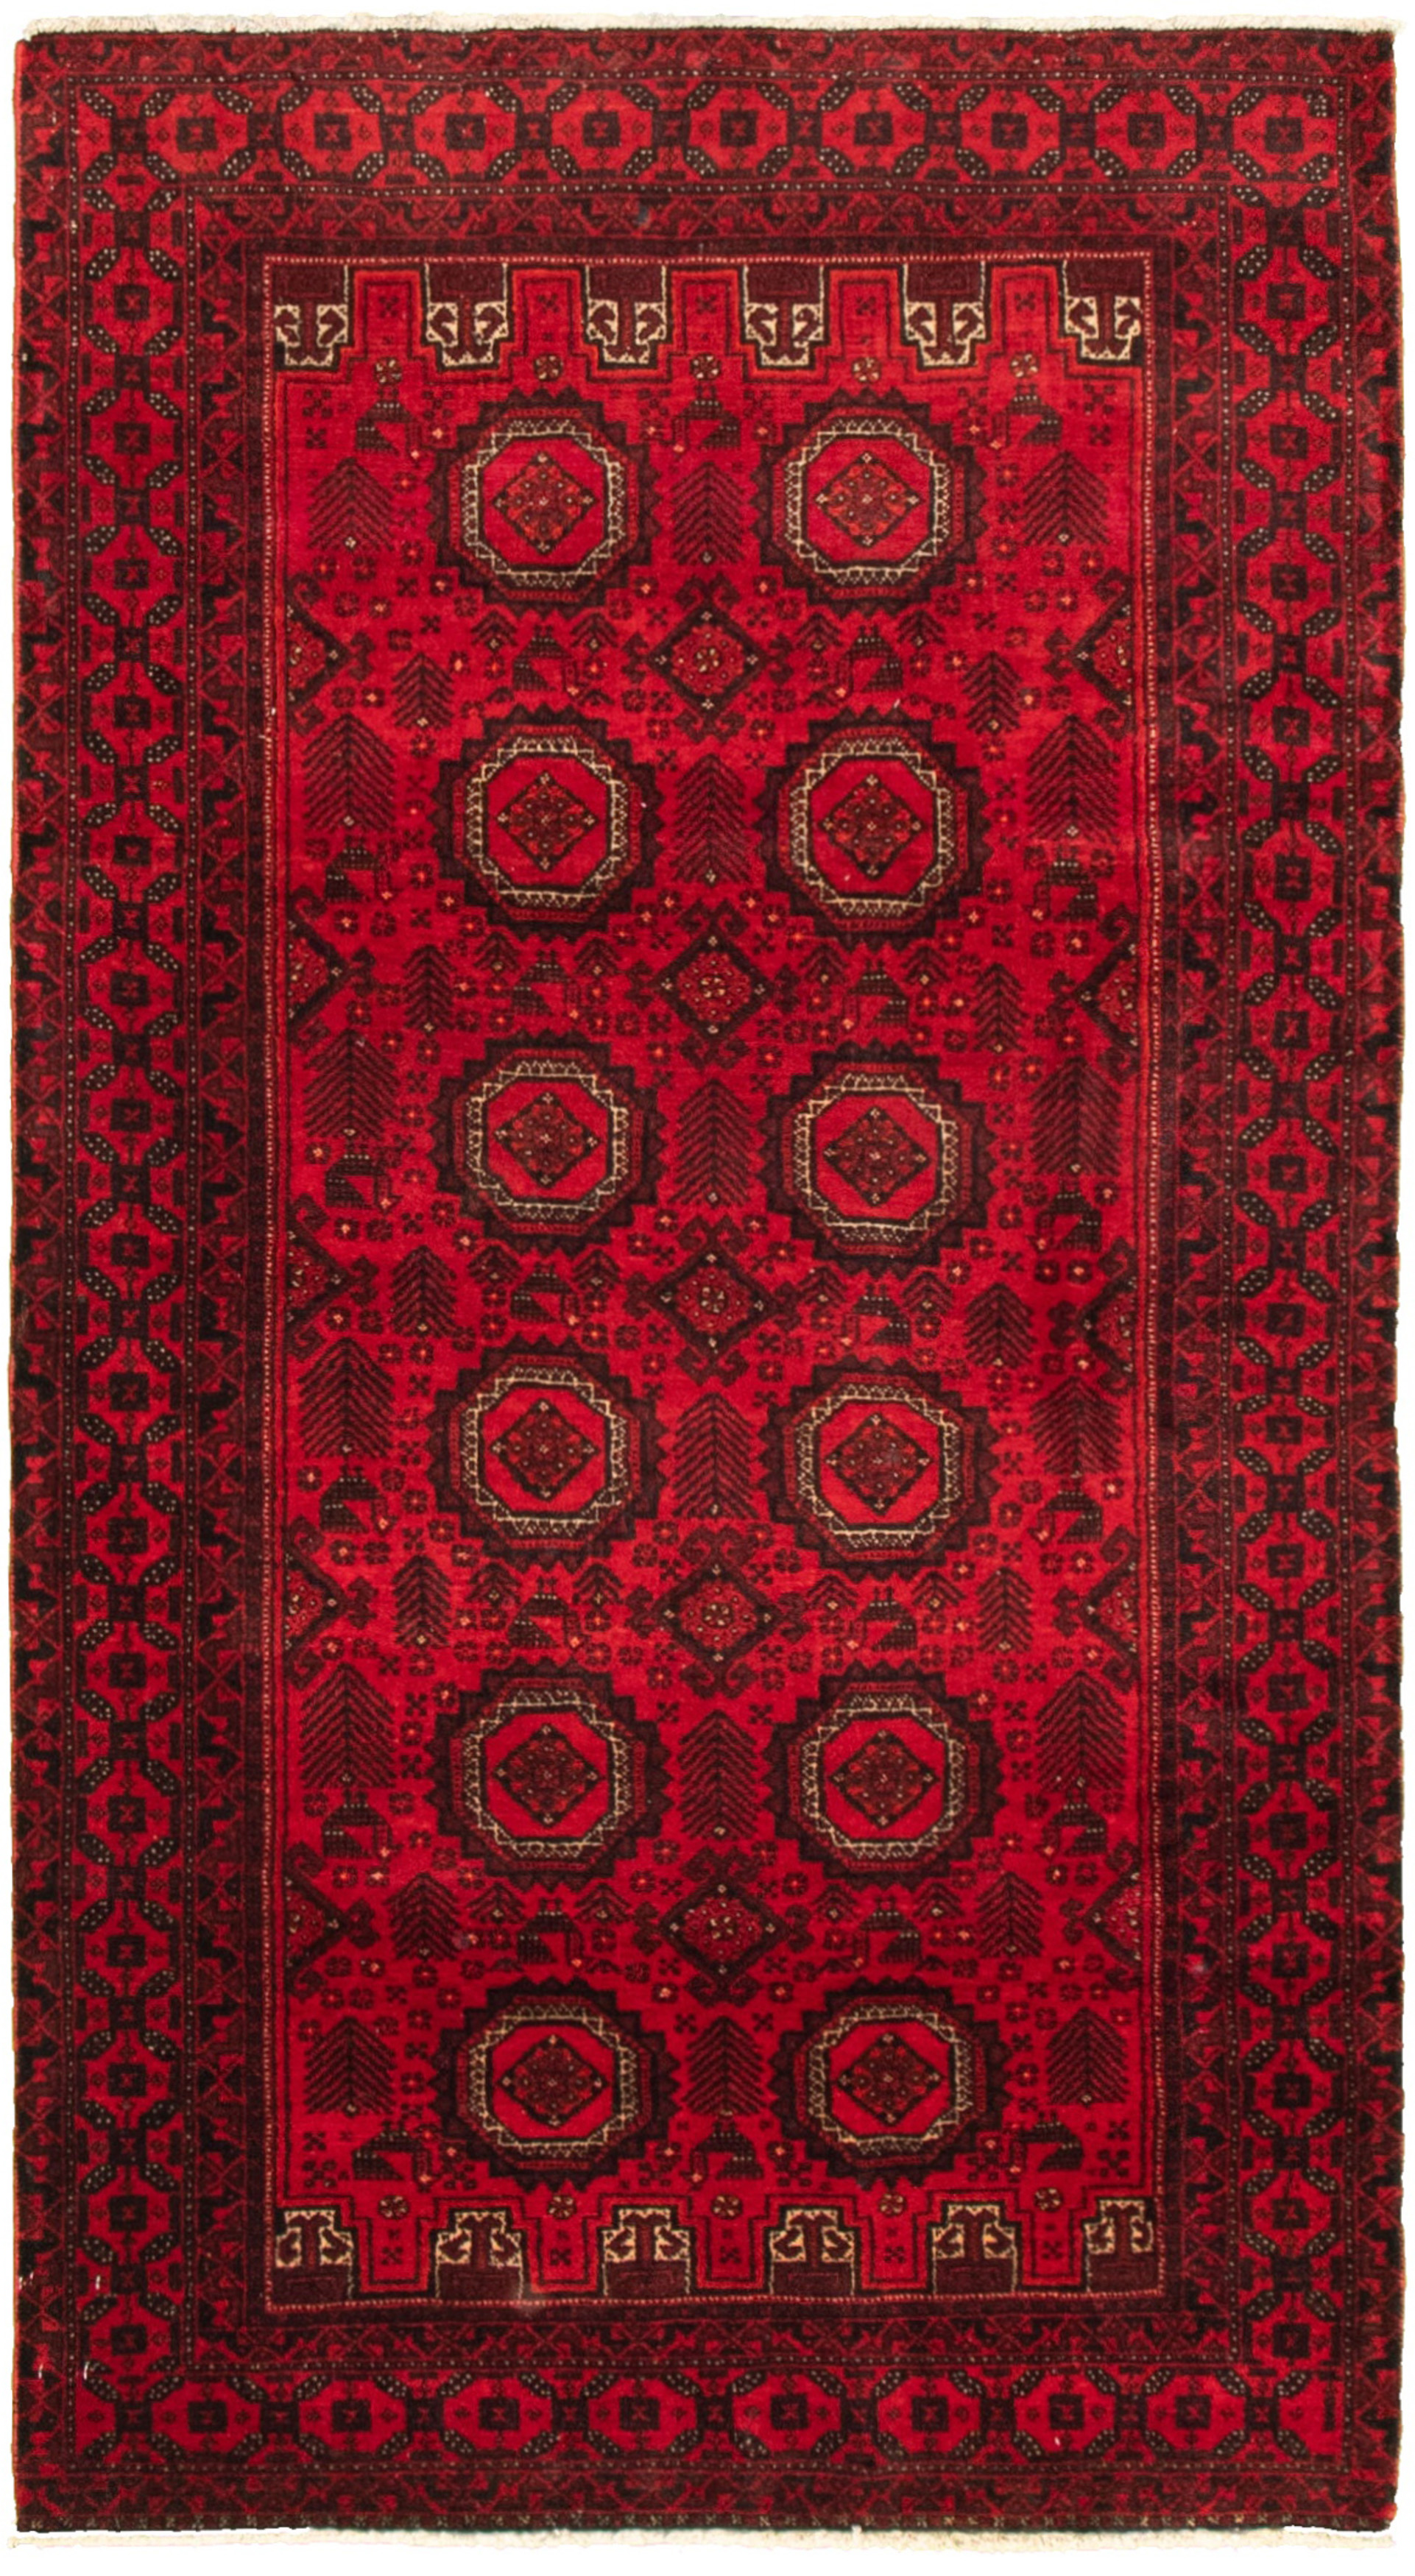 Hand-knotted Khal Mohammadi Red Wool Rug 3'2" x 5'11" Size: 3'2" x 5'11"  